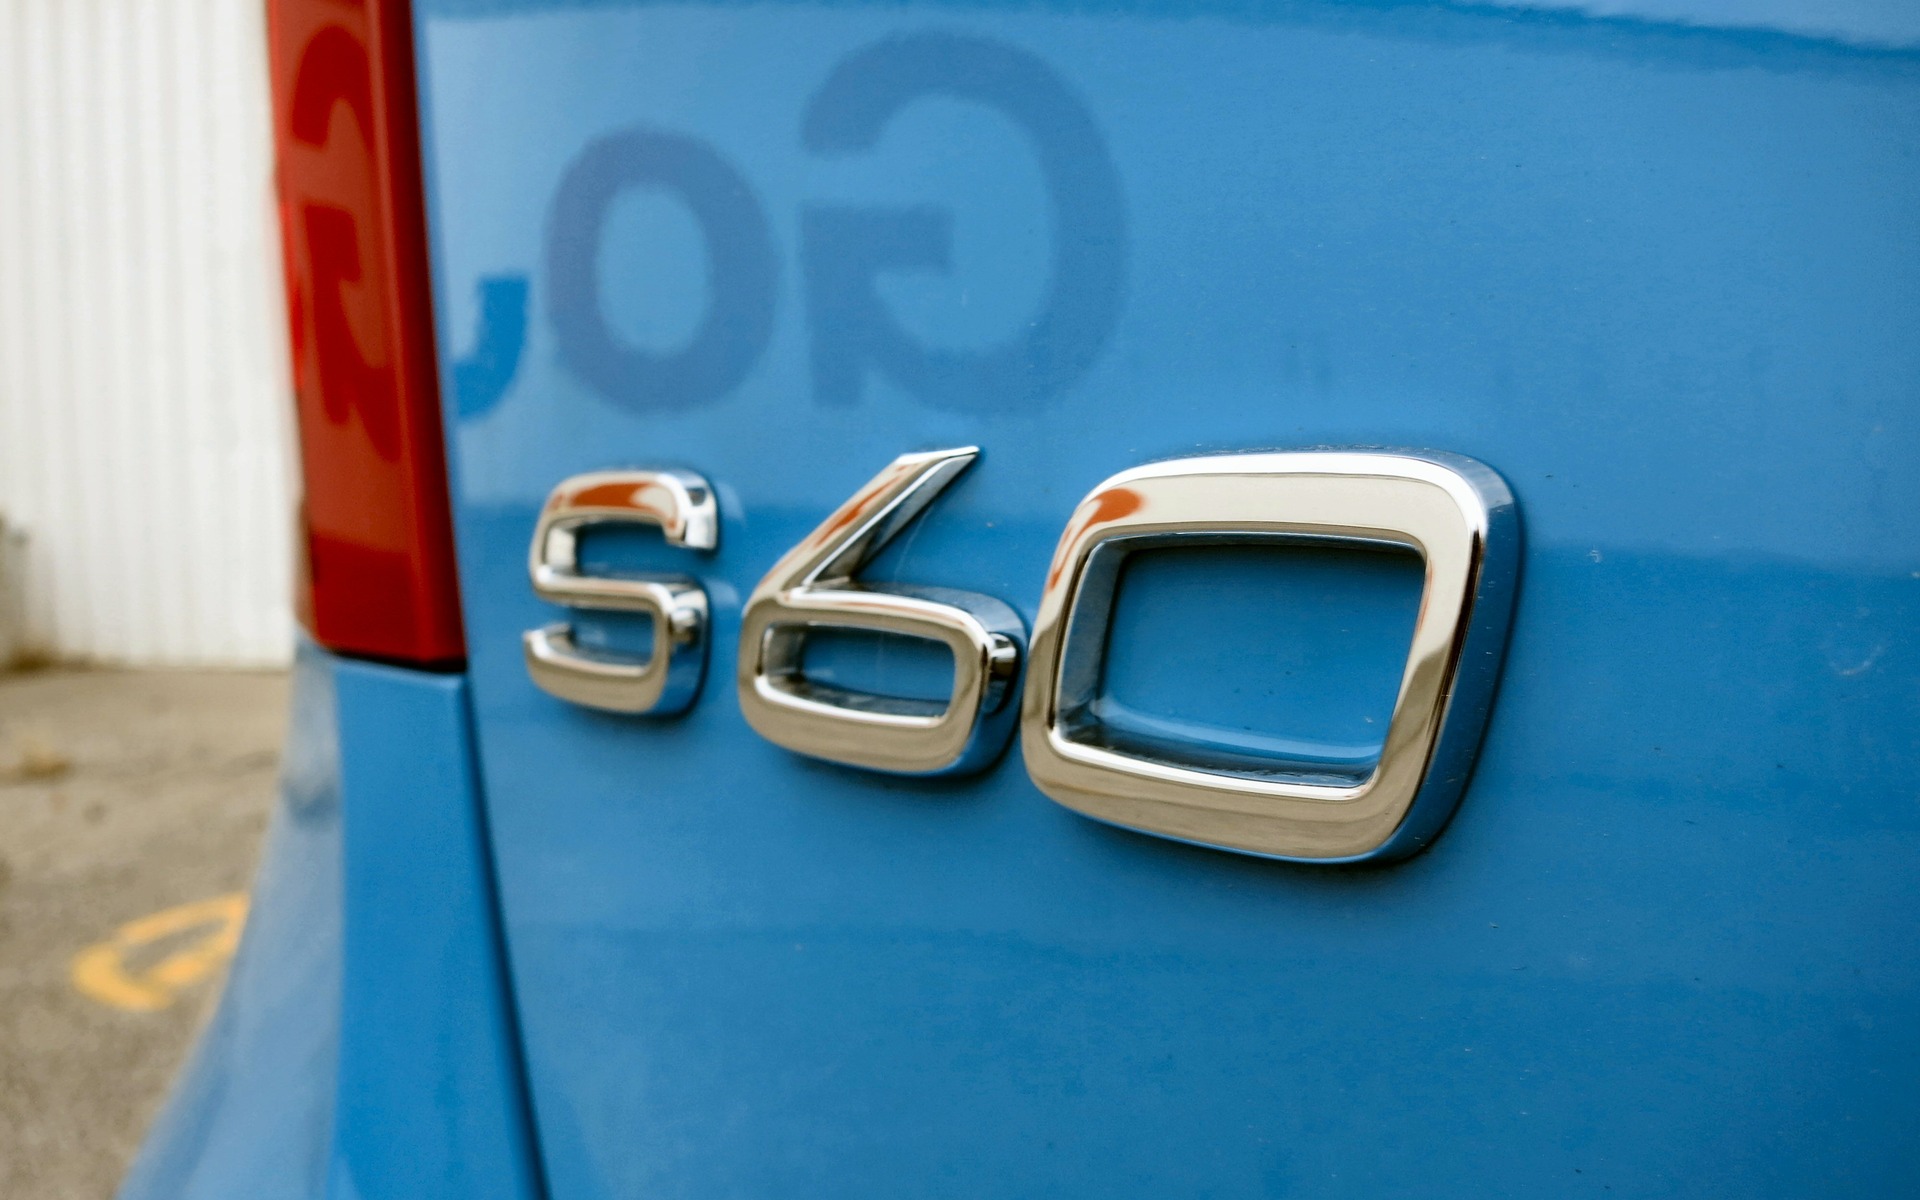 The Polestar is based on the S60 T-6 R-Design.